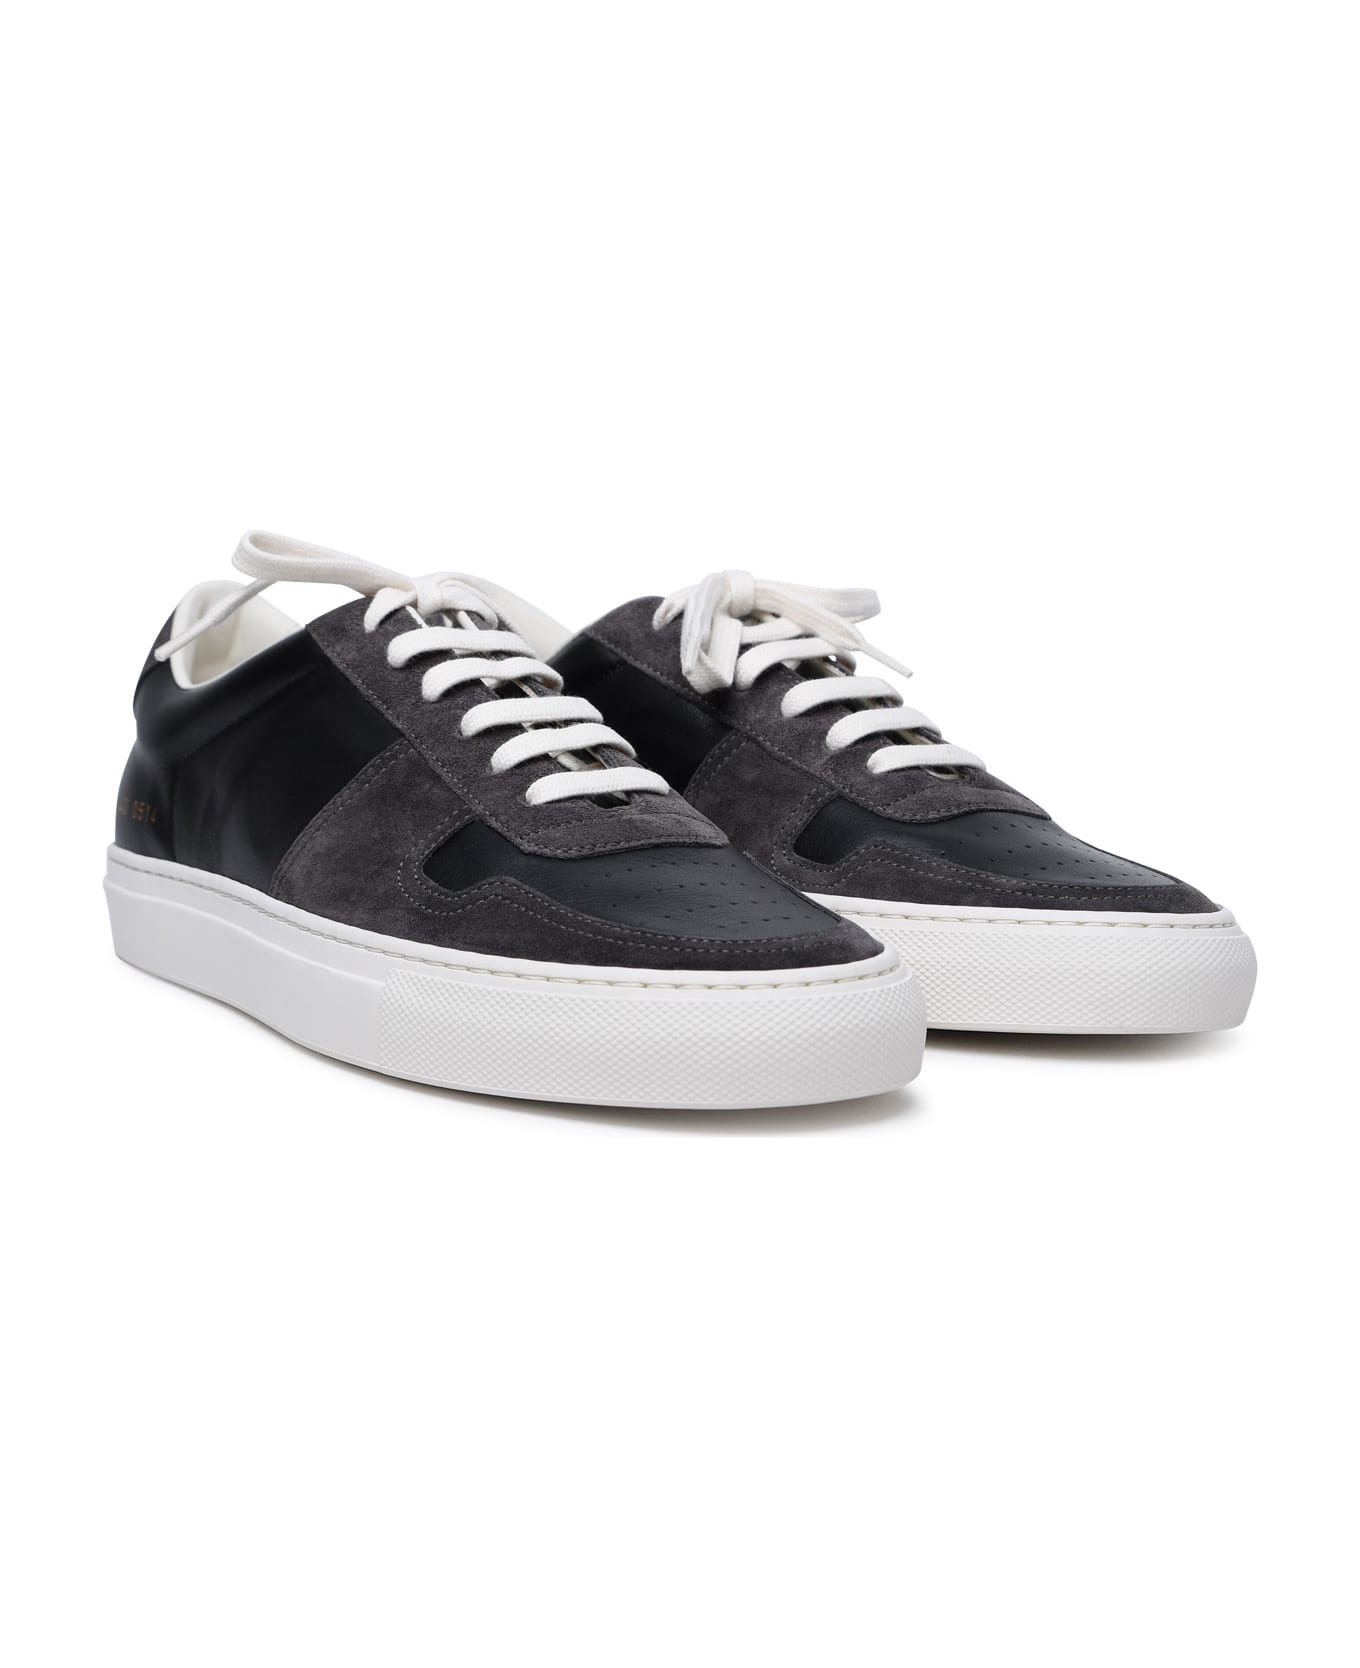 Common Projects Bball Duo Sneakers - Black スニーカー